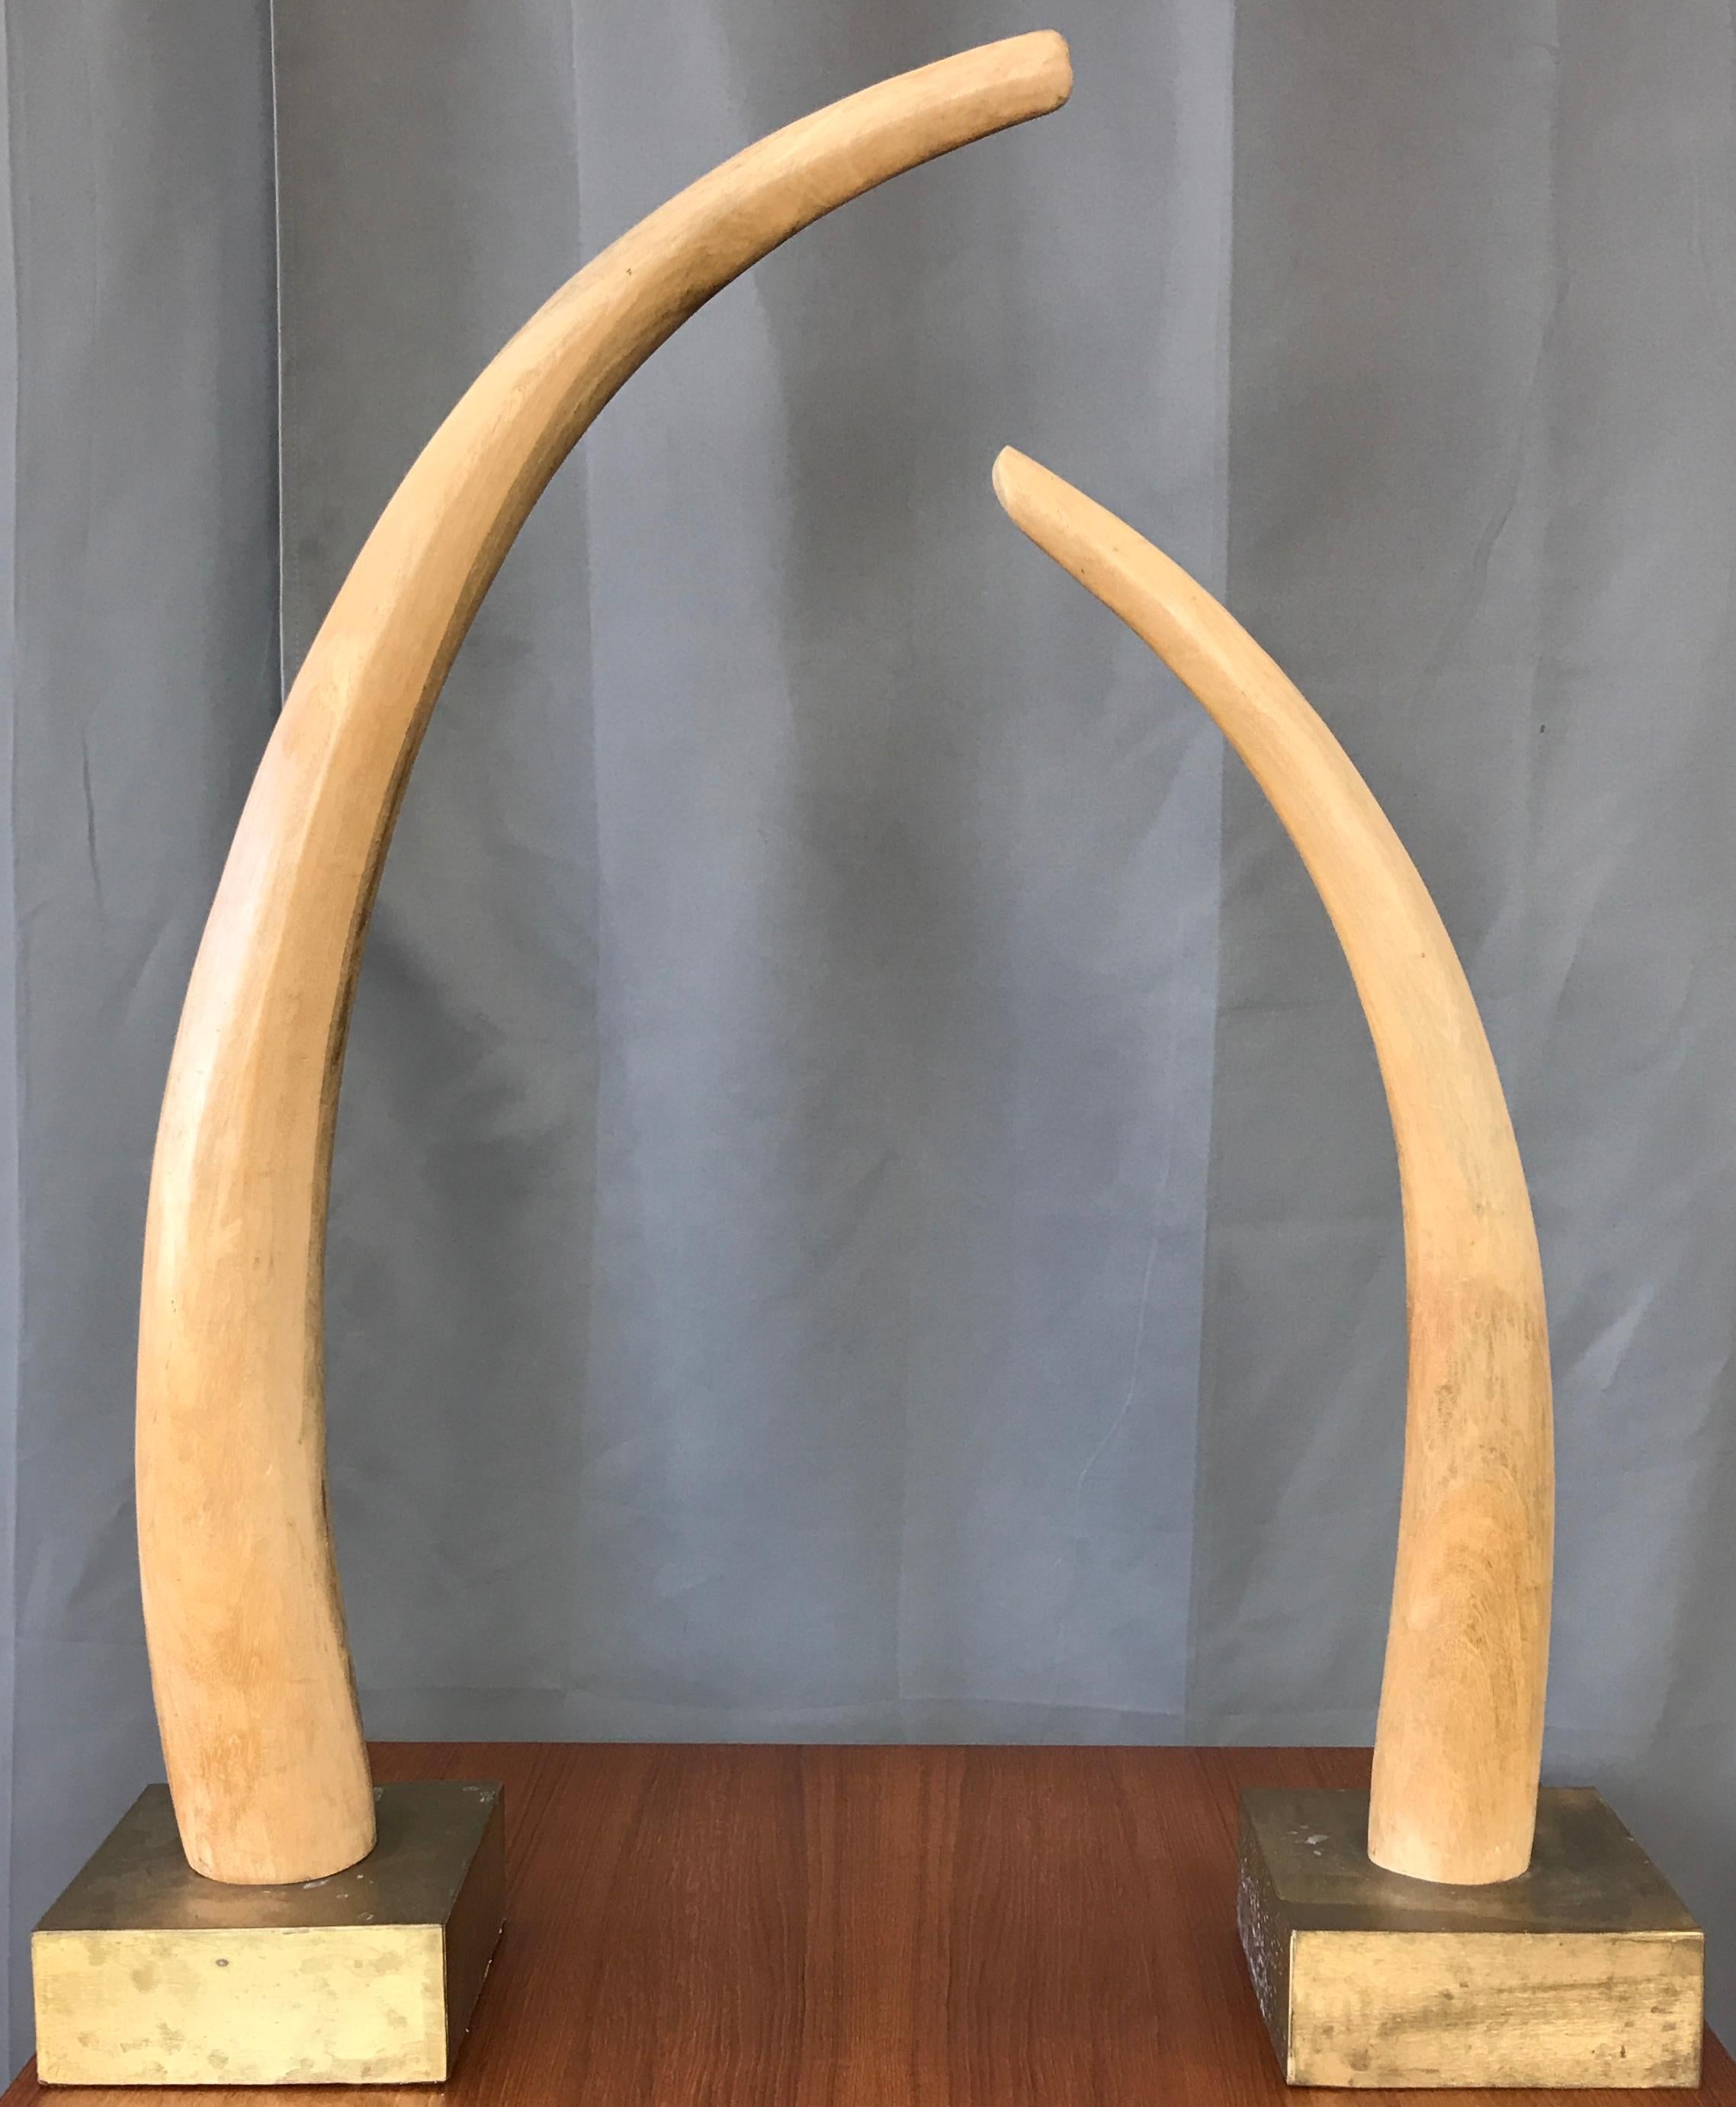 A Monumental pair of tall carved wood elephant tusks sculptures from Africa, both on square brass bases.
Bases themselves are 7.75 x 7.75 x 3.25, short one is about 31.50 inches tall and the taller one about 39.25 inches tall.